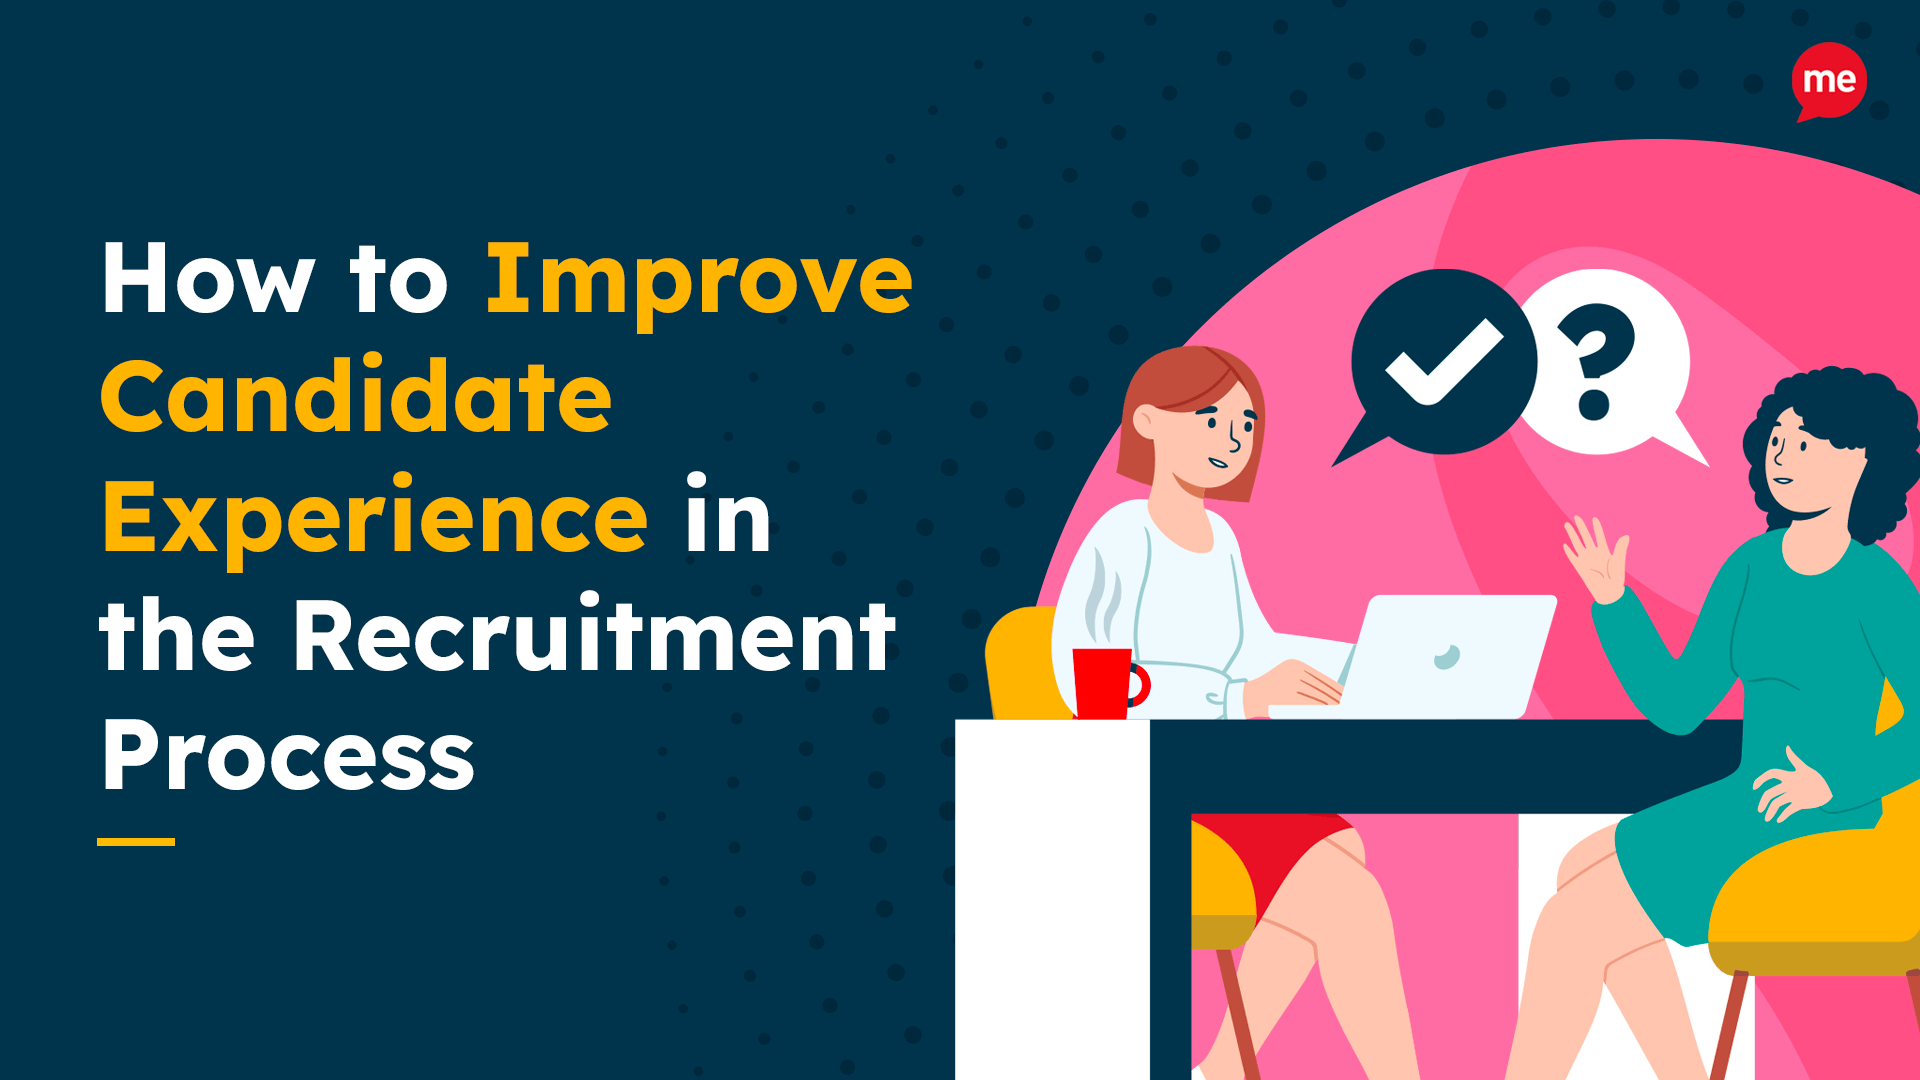 How to Improve Candidate Experience in the Recruitment Process